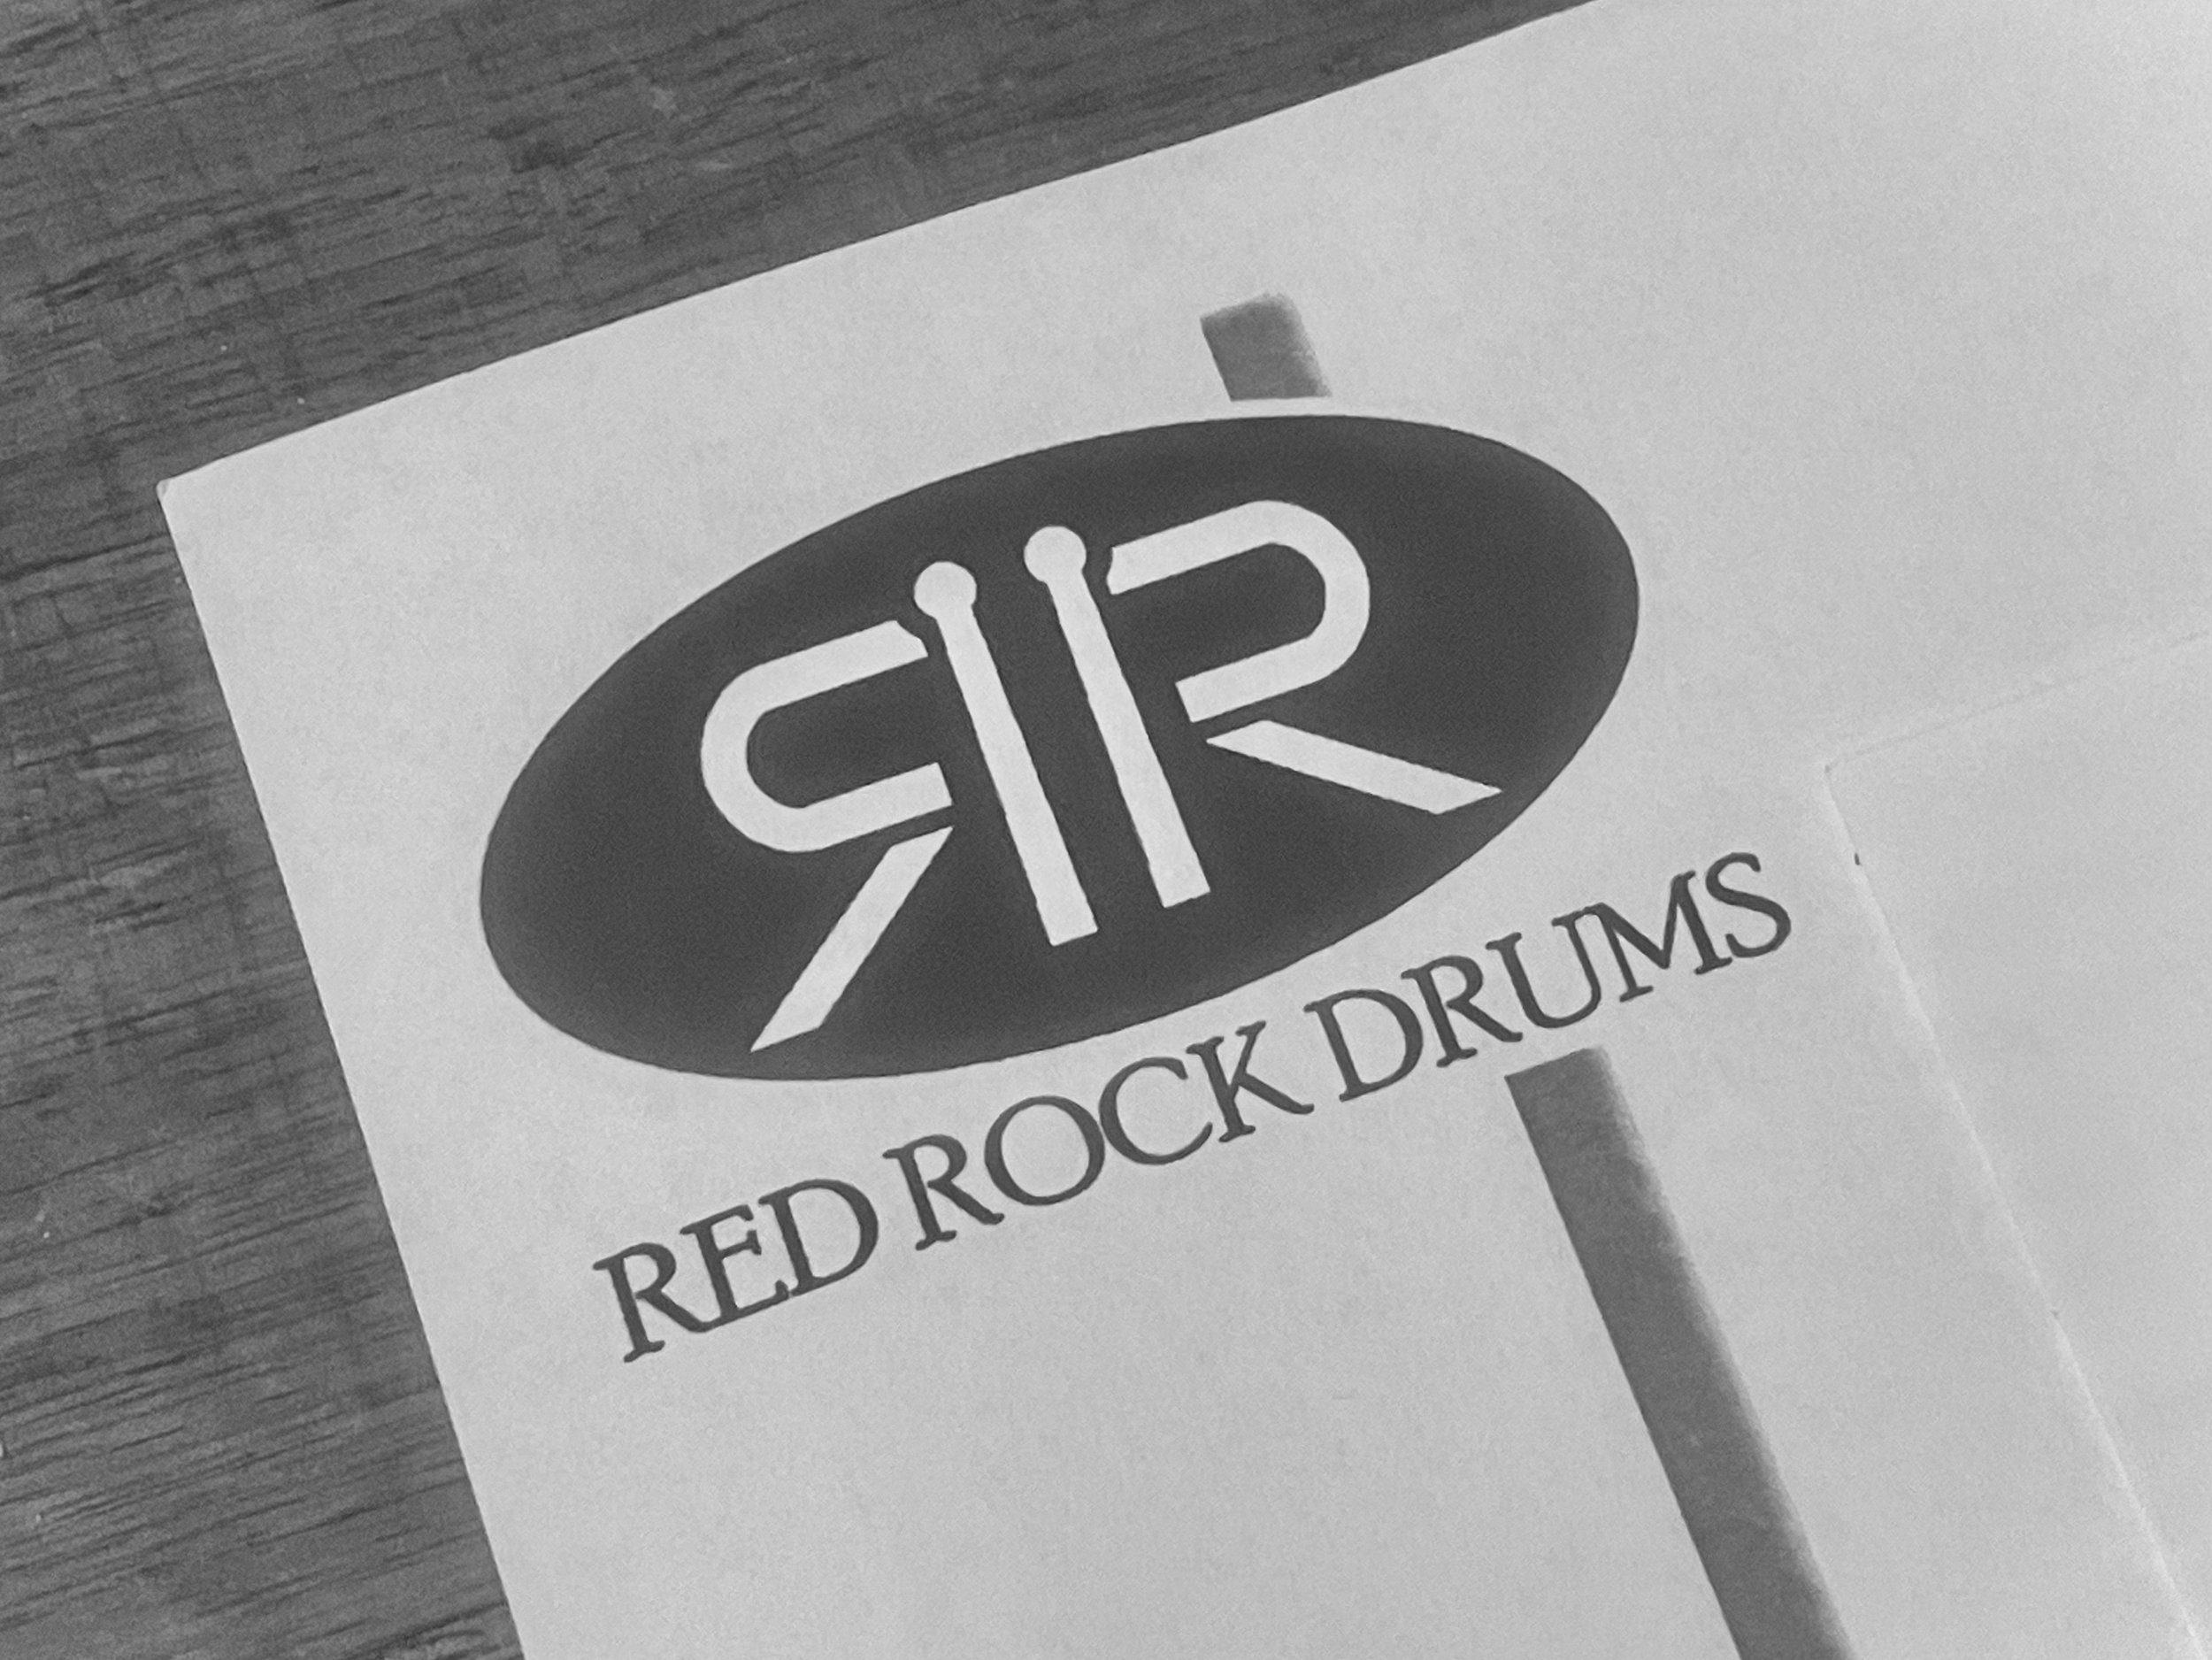 Red Rock Drum's very first logo (circa 2001)